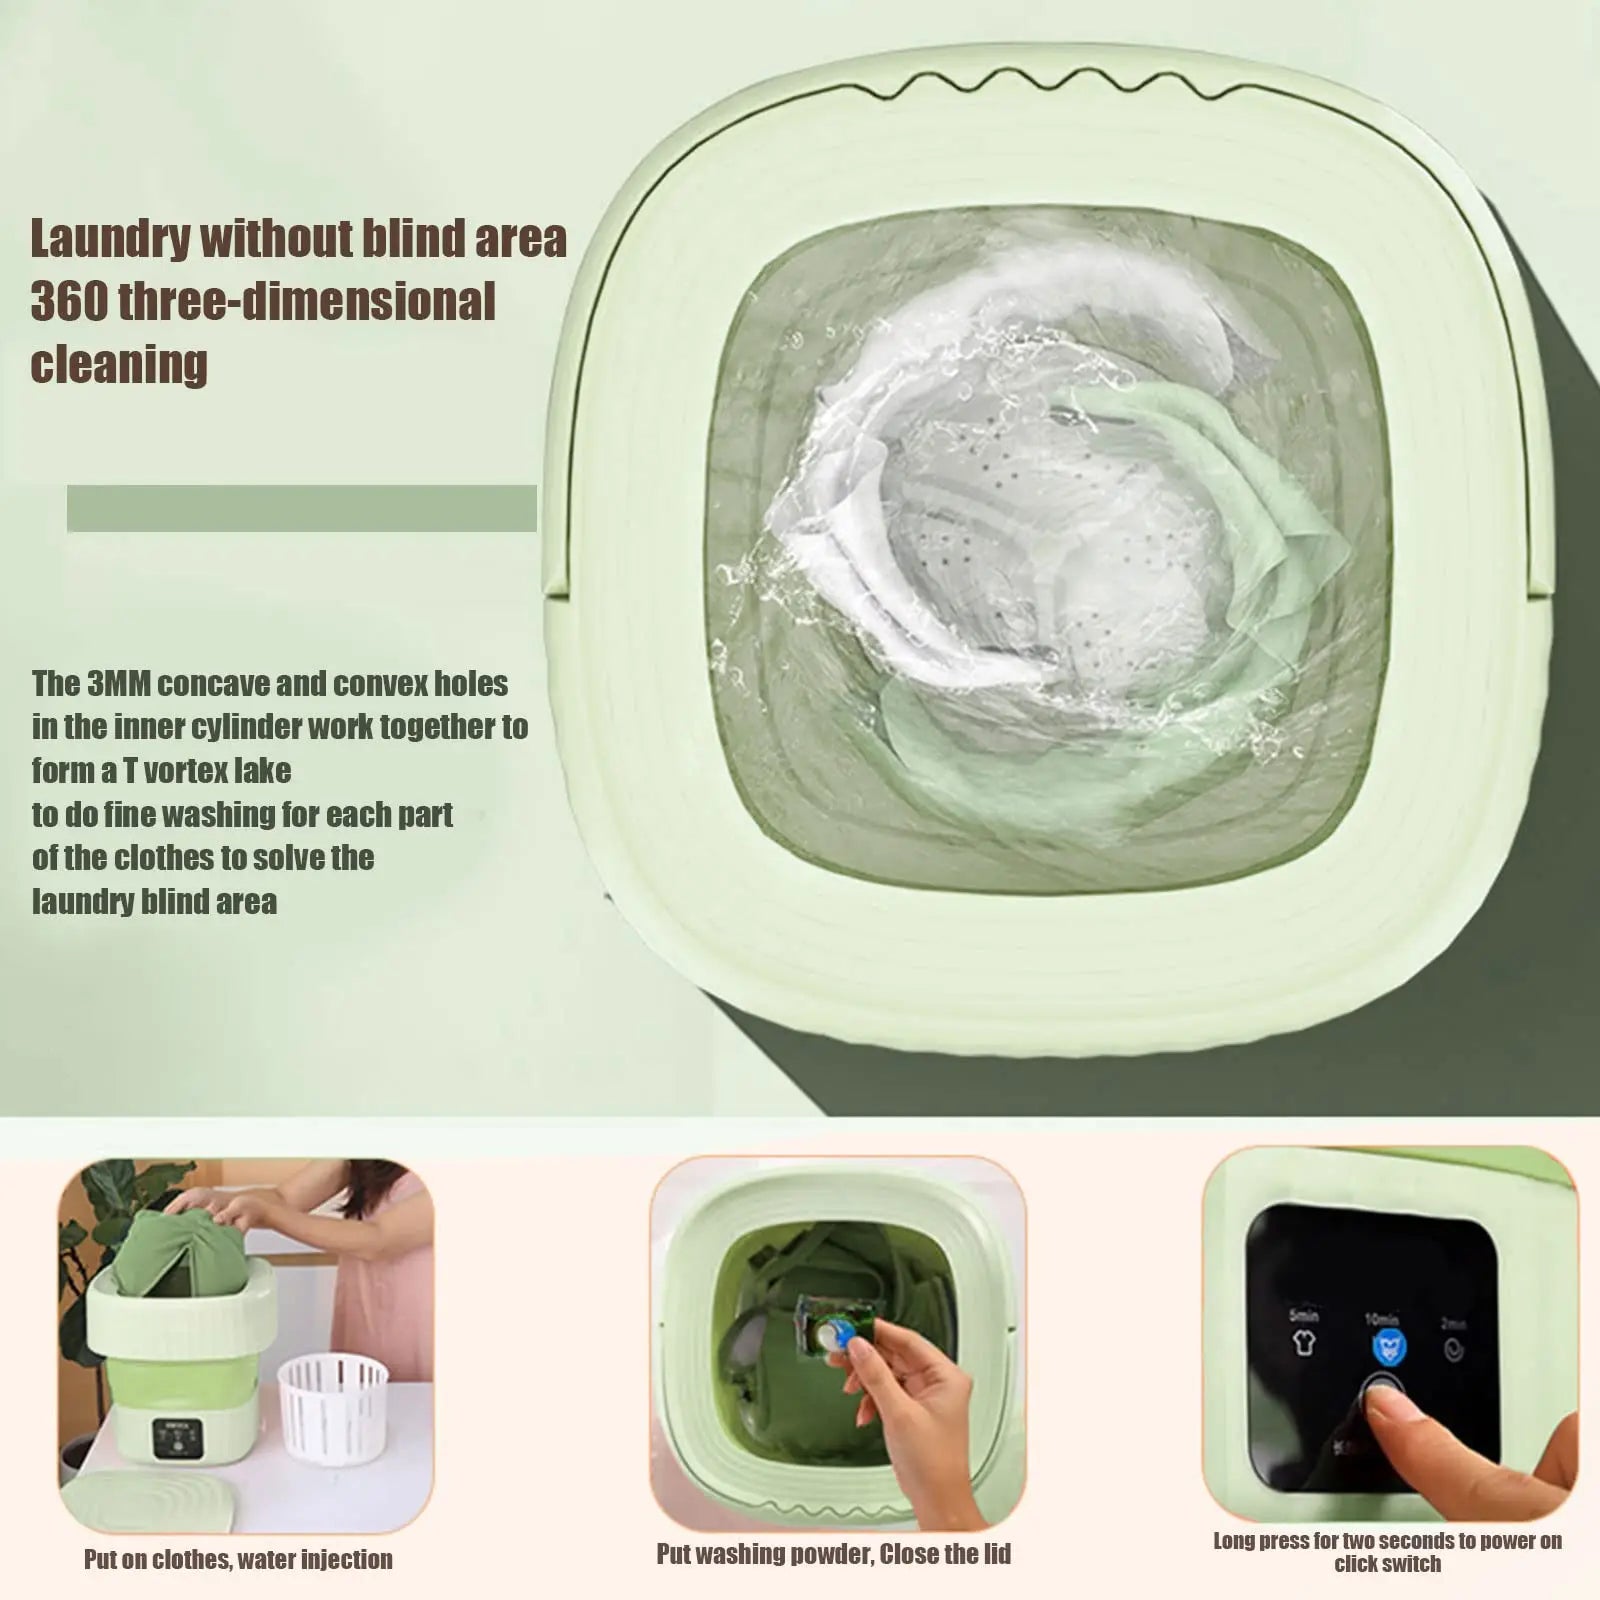 Portable Folding Washing Machine for Clothes with Drain Basket Dryer Feaction 3 Washing Modes for Underwear Baby Clothes